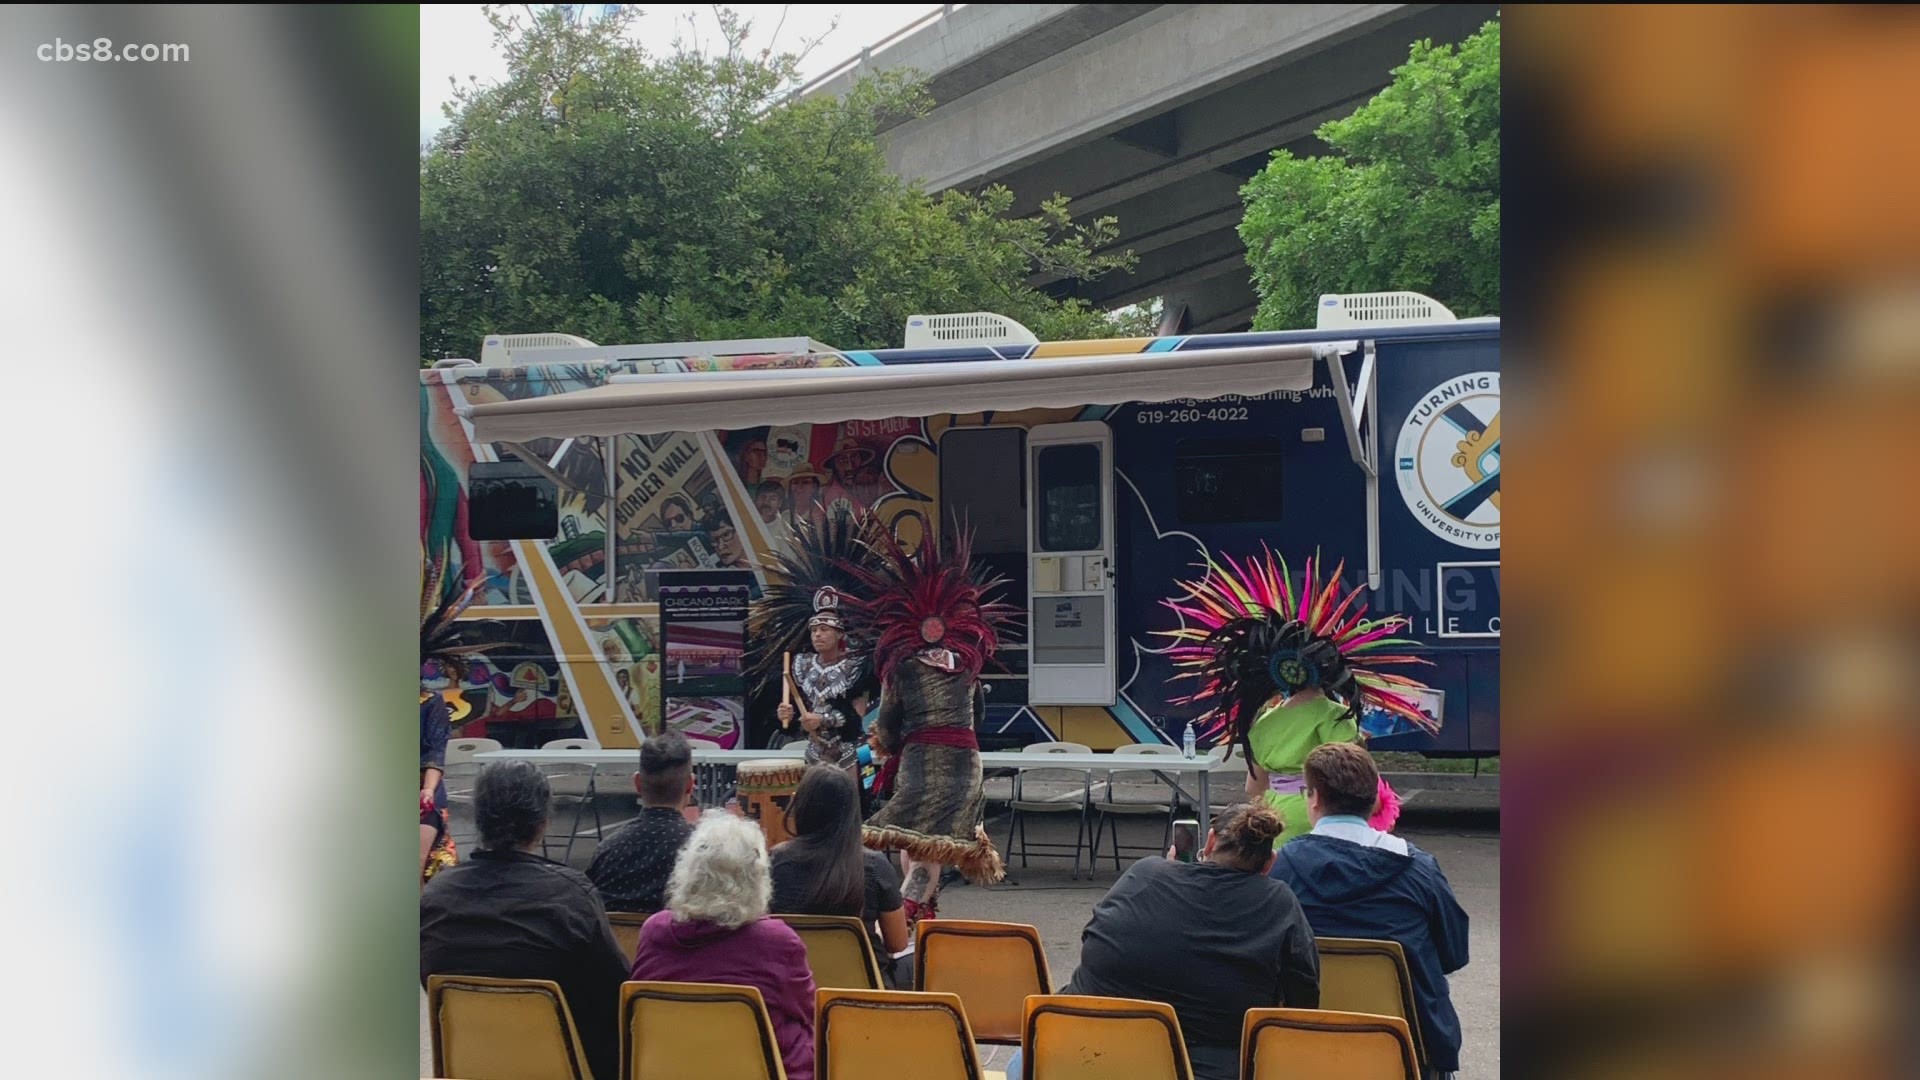 The bus is an effort by USD's Ethnic Studies program to bring a classroom environment, cultural center and resources like WiFi to Chicano Park and Logan Heights.